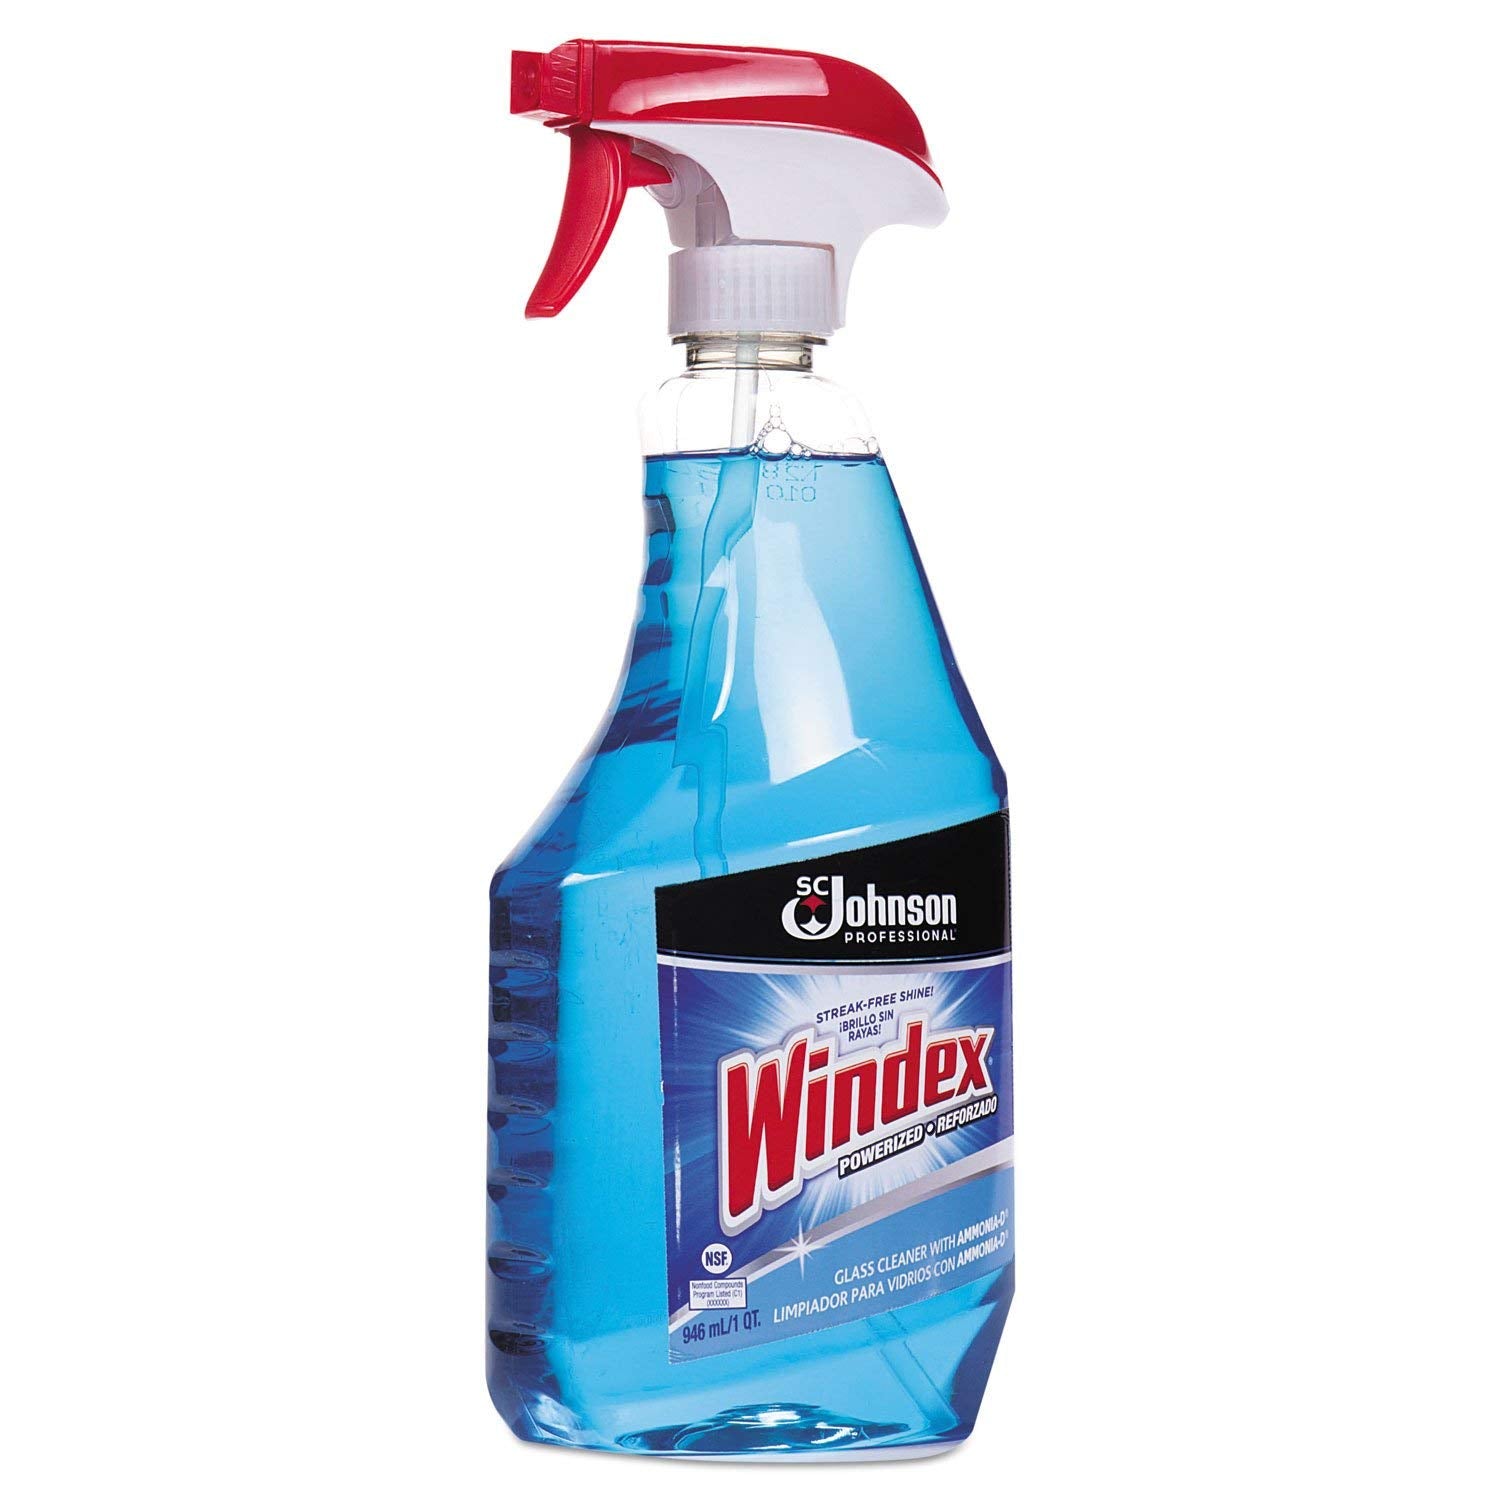 Wholesale windshield cleaning tool To Make Cleaning Simple